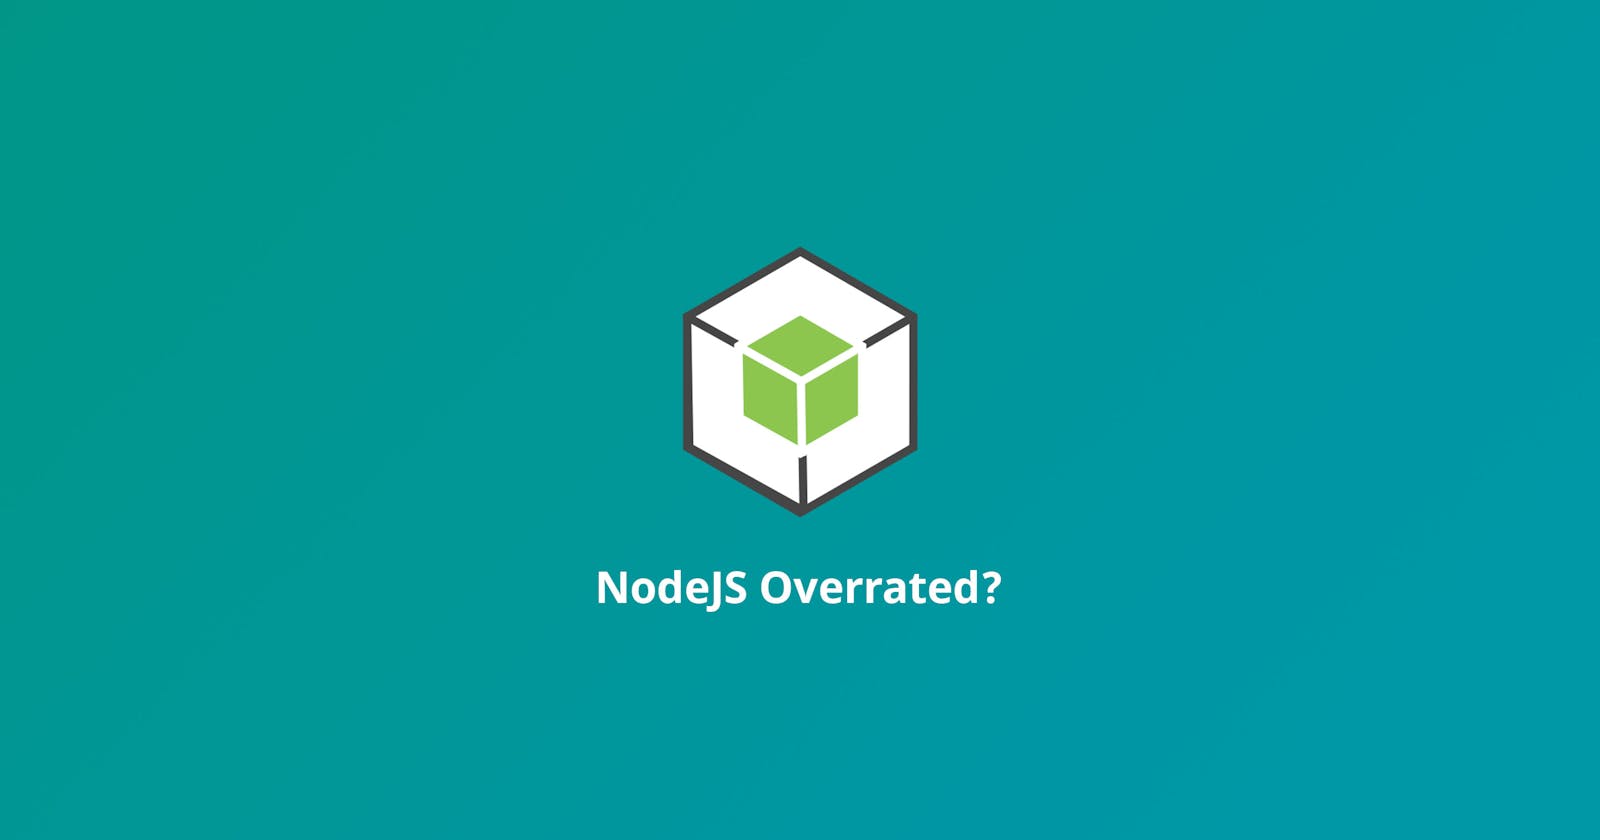 Is Node.js Overrated? Let's find out what the community said